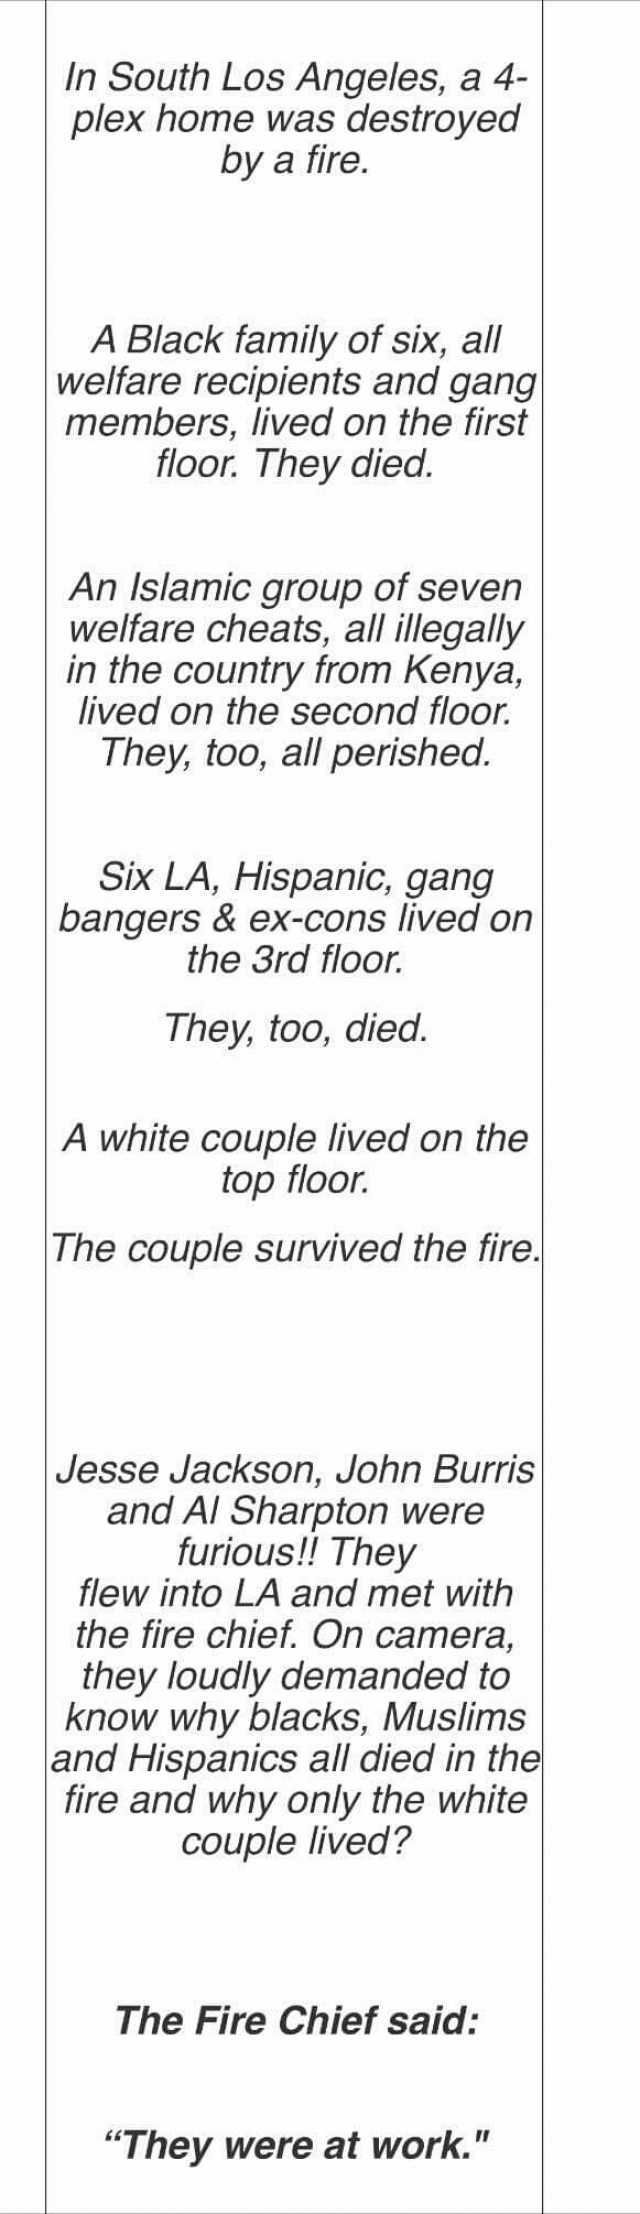 In South Los Angeles a 4- plex home was destroyed Dy a fire. A Black family of six all welfare recipients and gang members lived on the first floor. They died. An Islamic group of seven welfare cheats all illegally in the country 